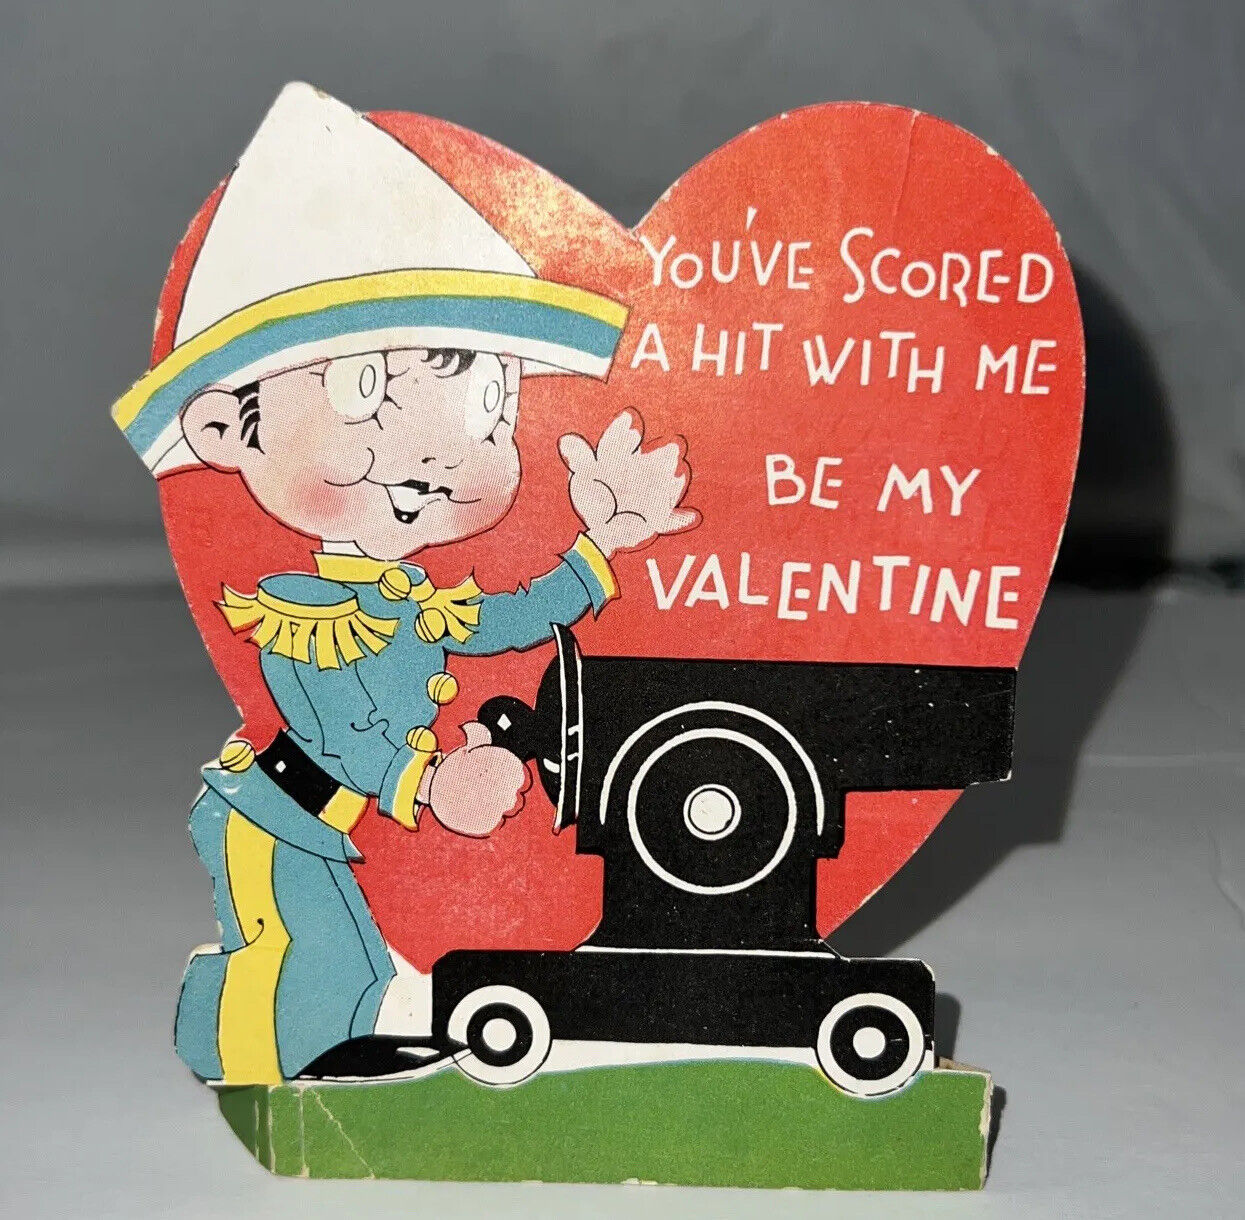 Vintage Used Valentine Card Stand Up You’ve Scored A Hit With Me Soldier Canon